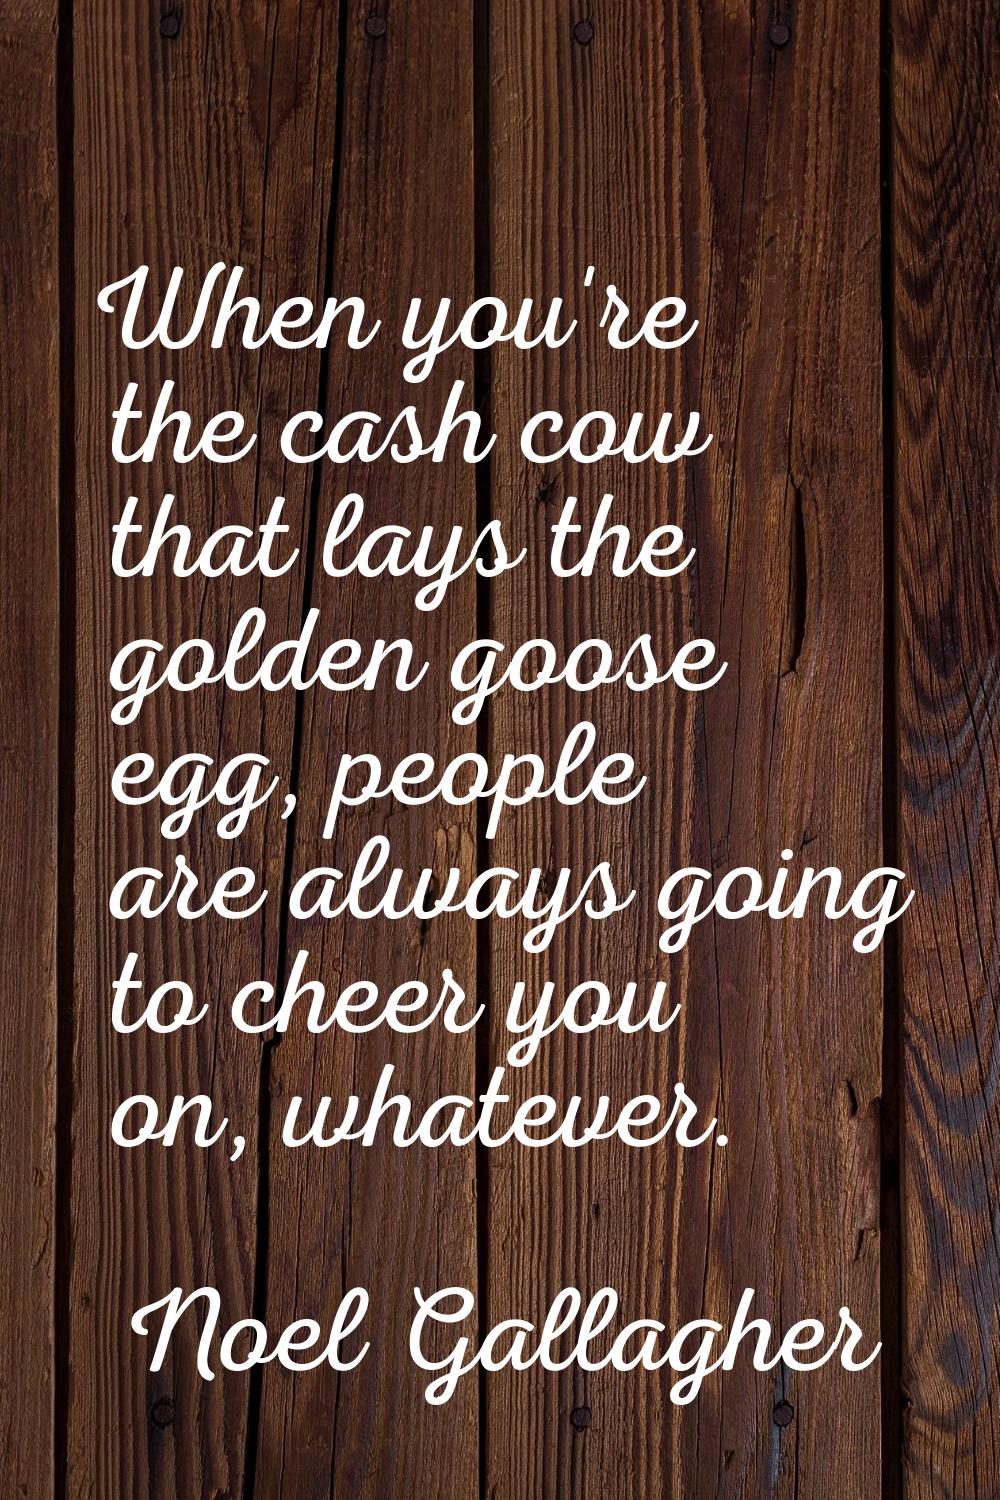 When you're the cash cow that lays the golden goose egg, people are always going to cheer you on, w